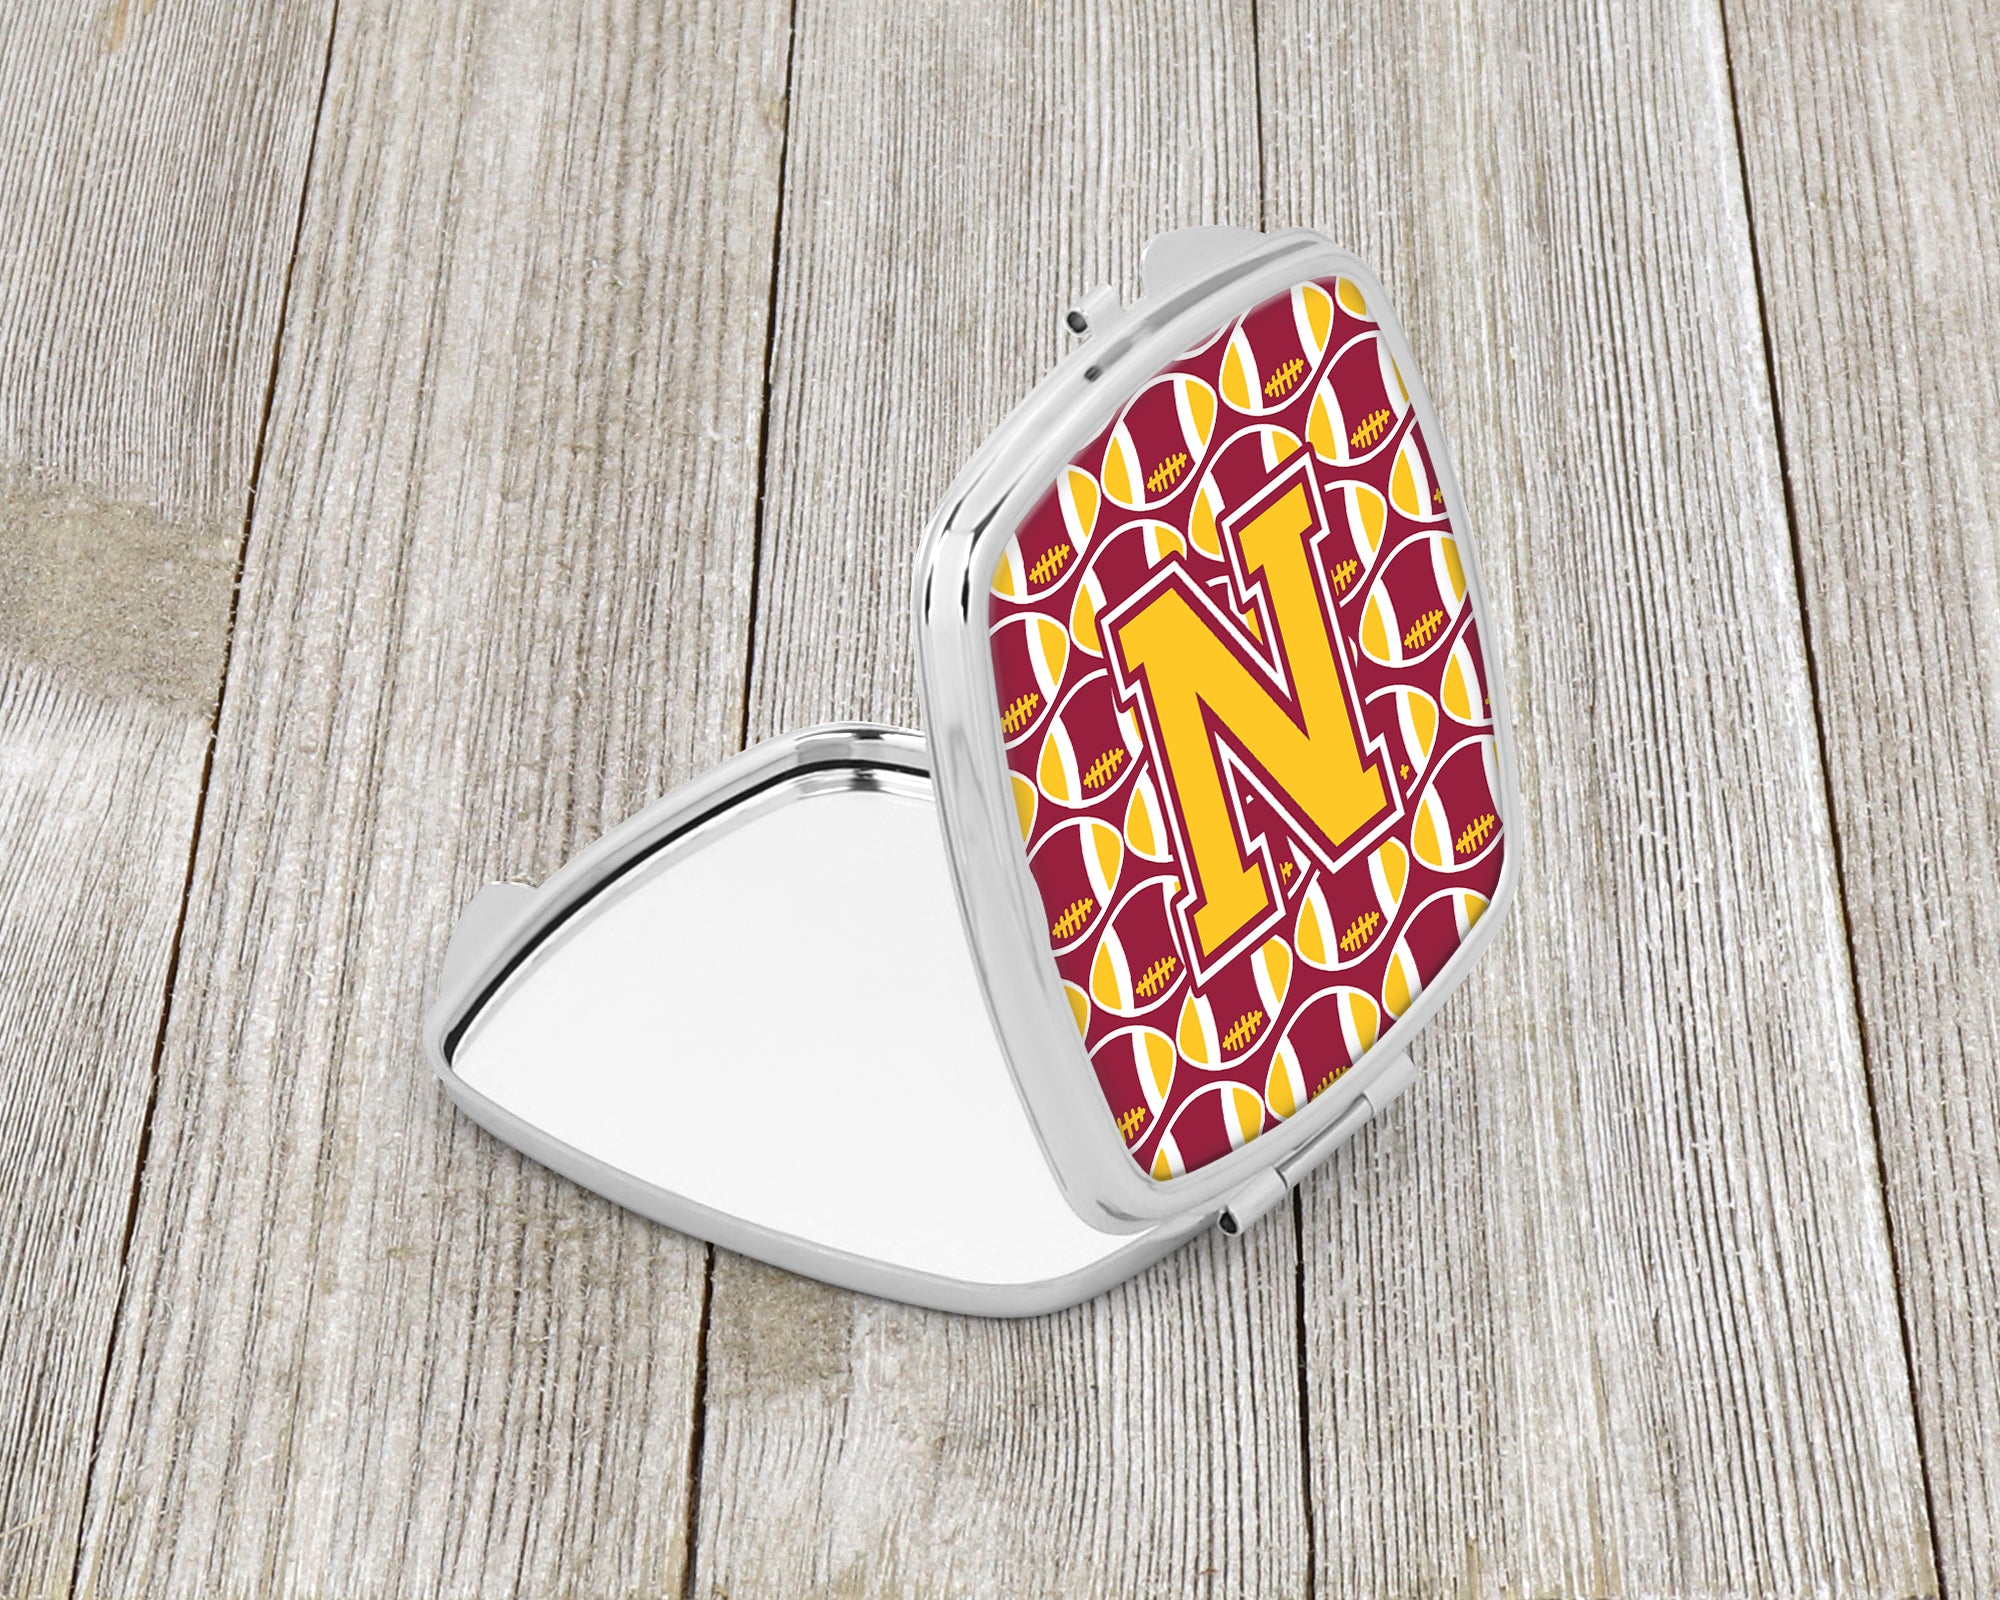 Letter N Football Maroon and Gold Compact Mirror CJ1081-NSCM  the-store.com.